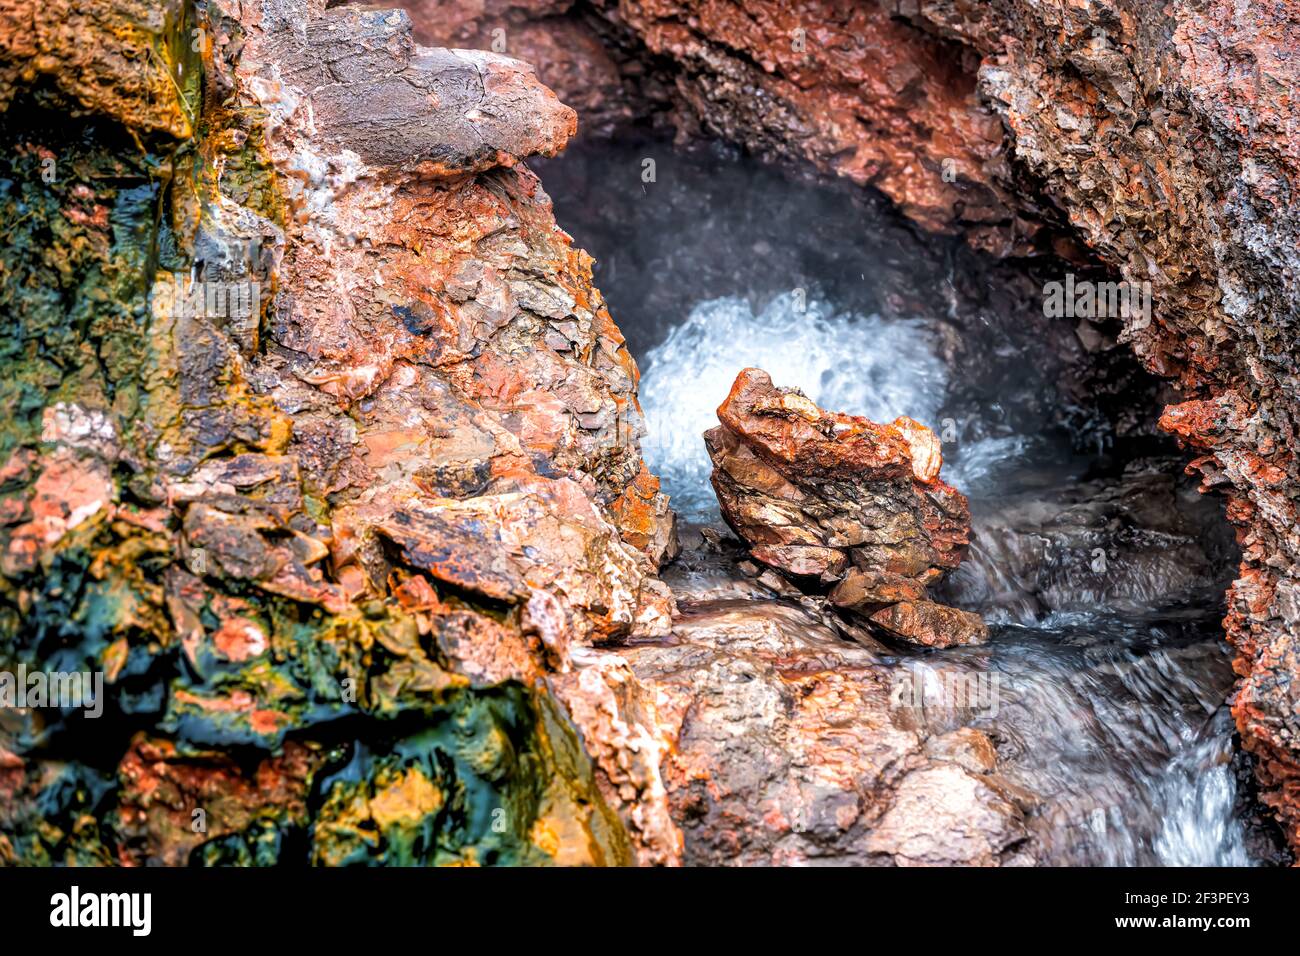 Closeup of steam geyser in Deildartunguhver hot springs in Iceland with red rock colorful cave opening hole and water boiling Stock Photo